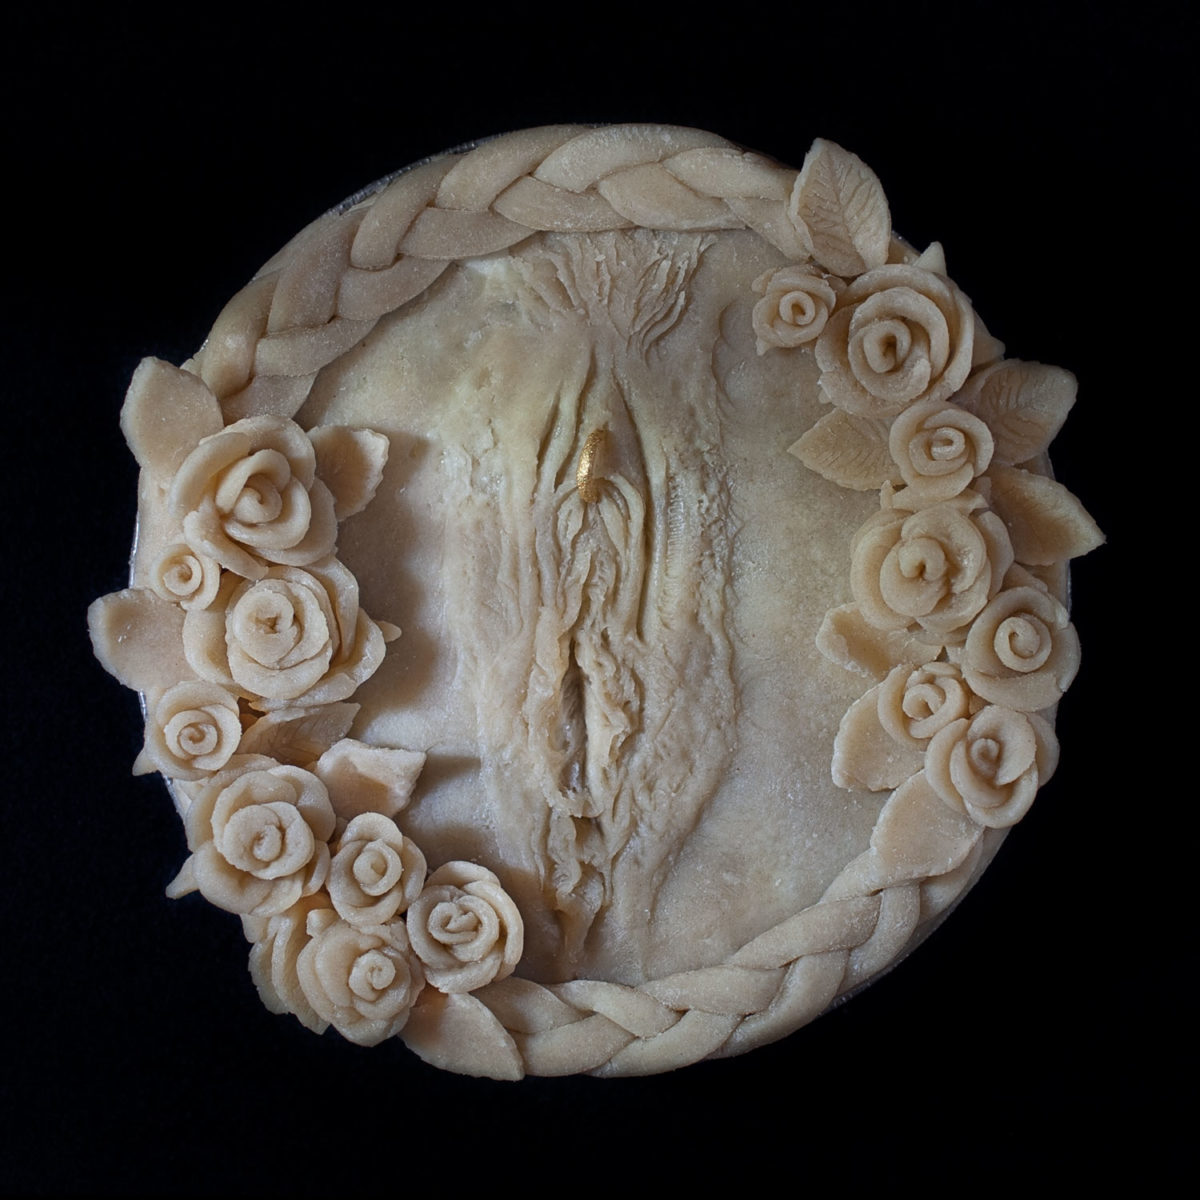 Unbaked pie with hand sculpted vulva art. Pie crust roses and a braid surround the vulva.